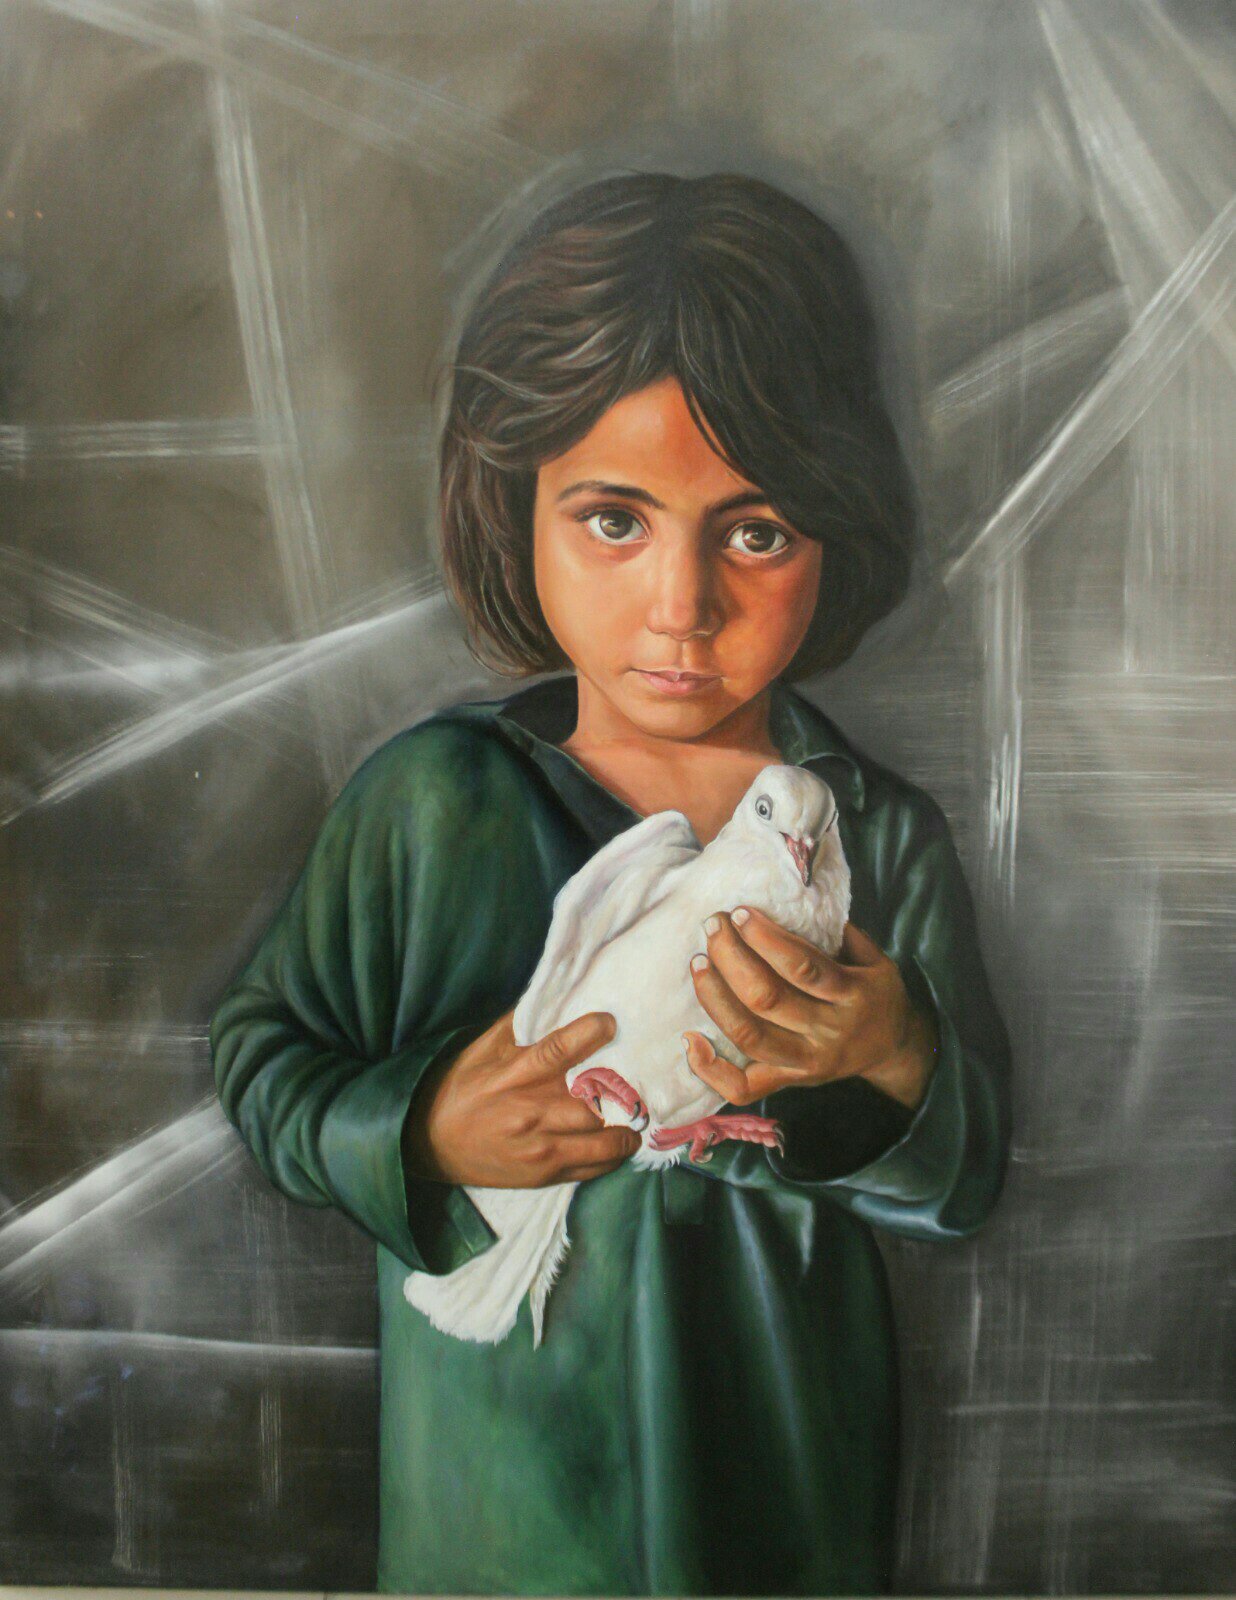 Medium: Oil on canvas <br> Size:  68x55 inches